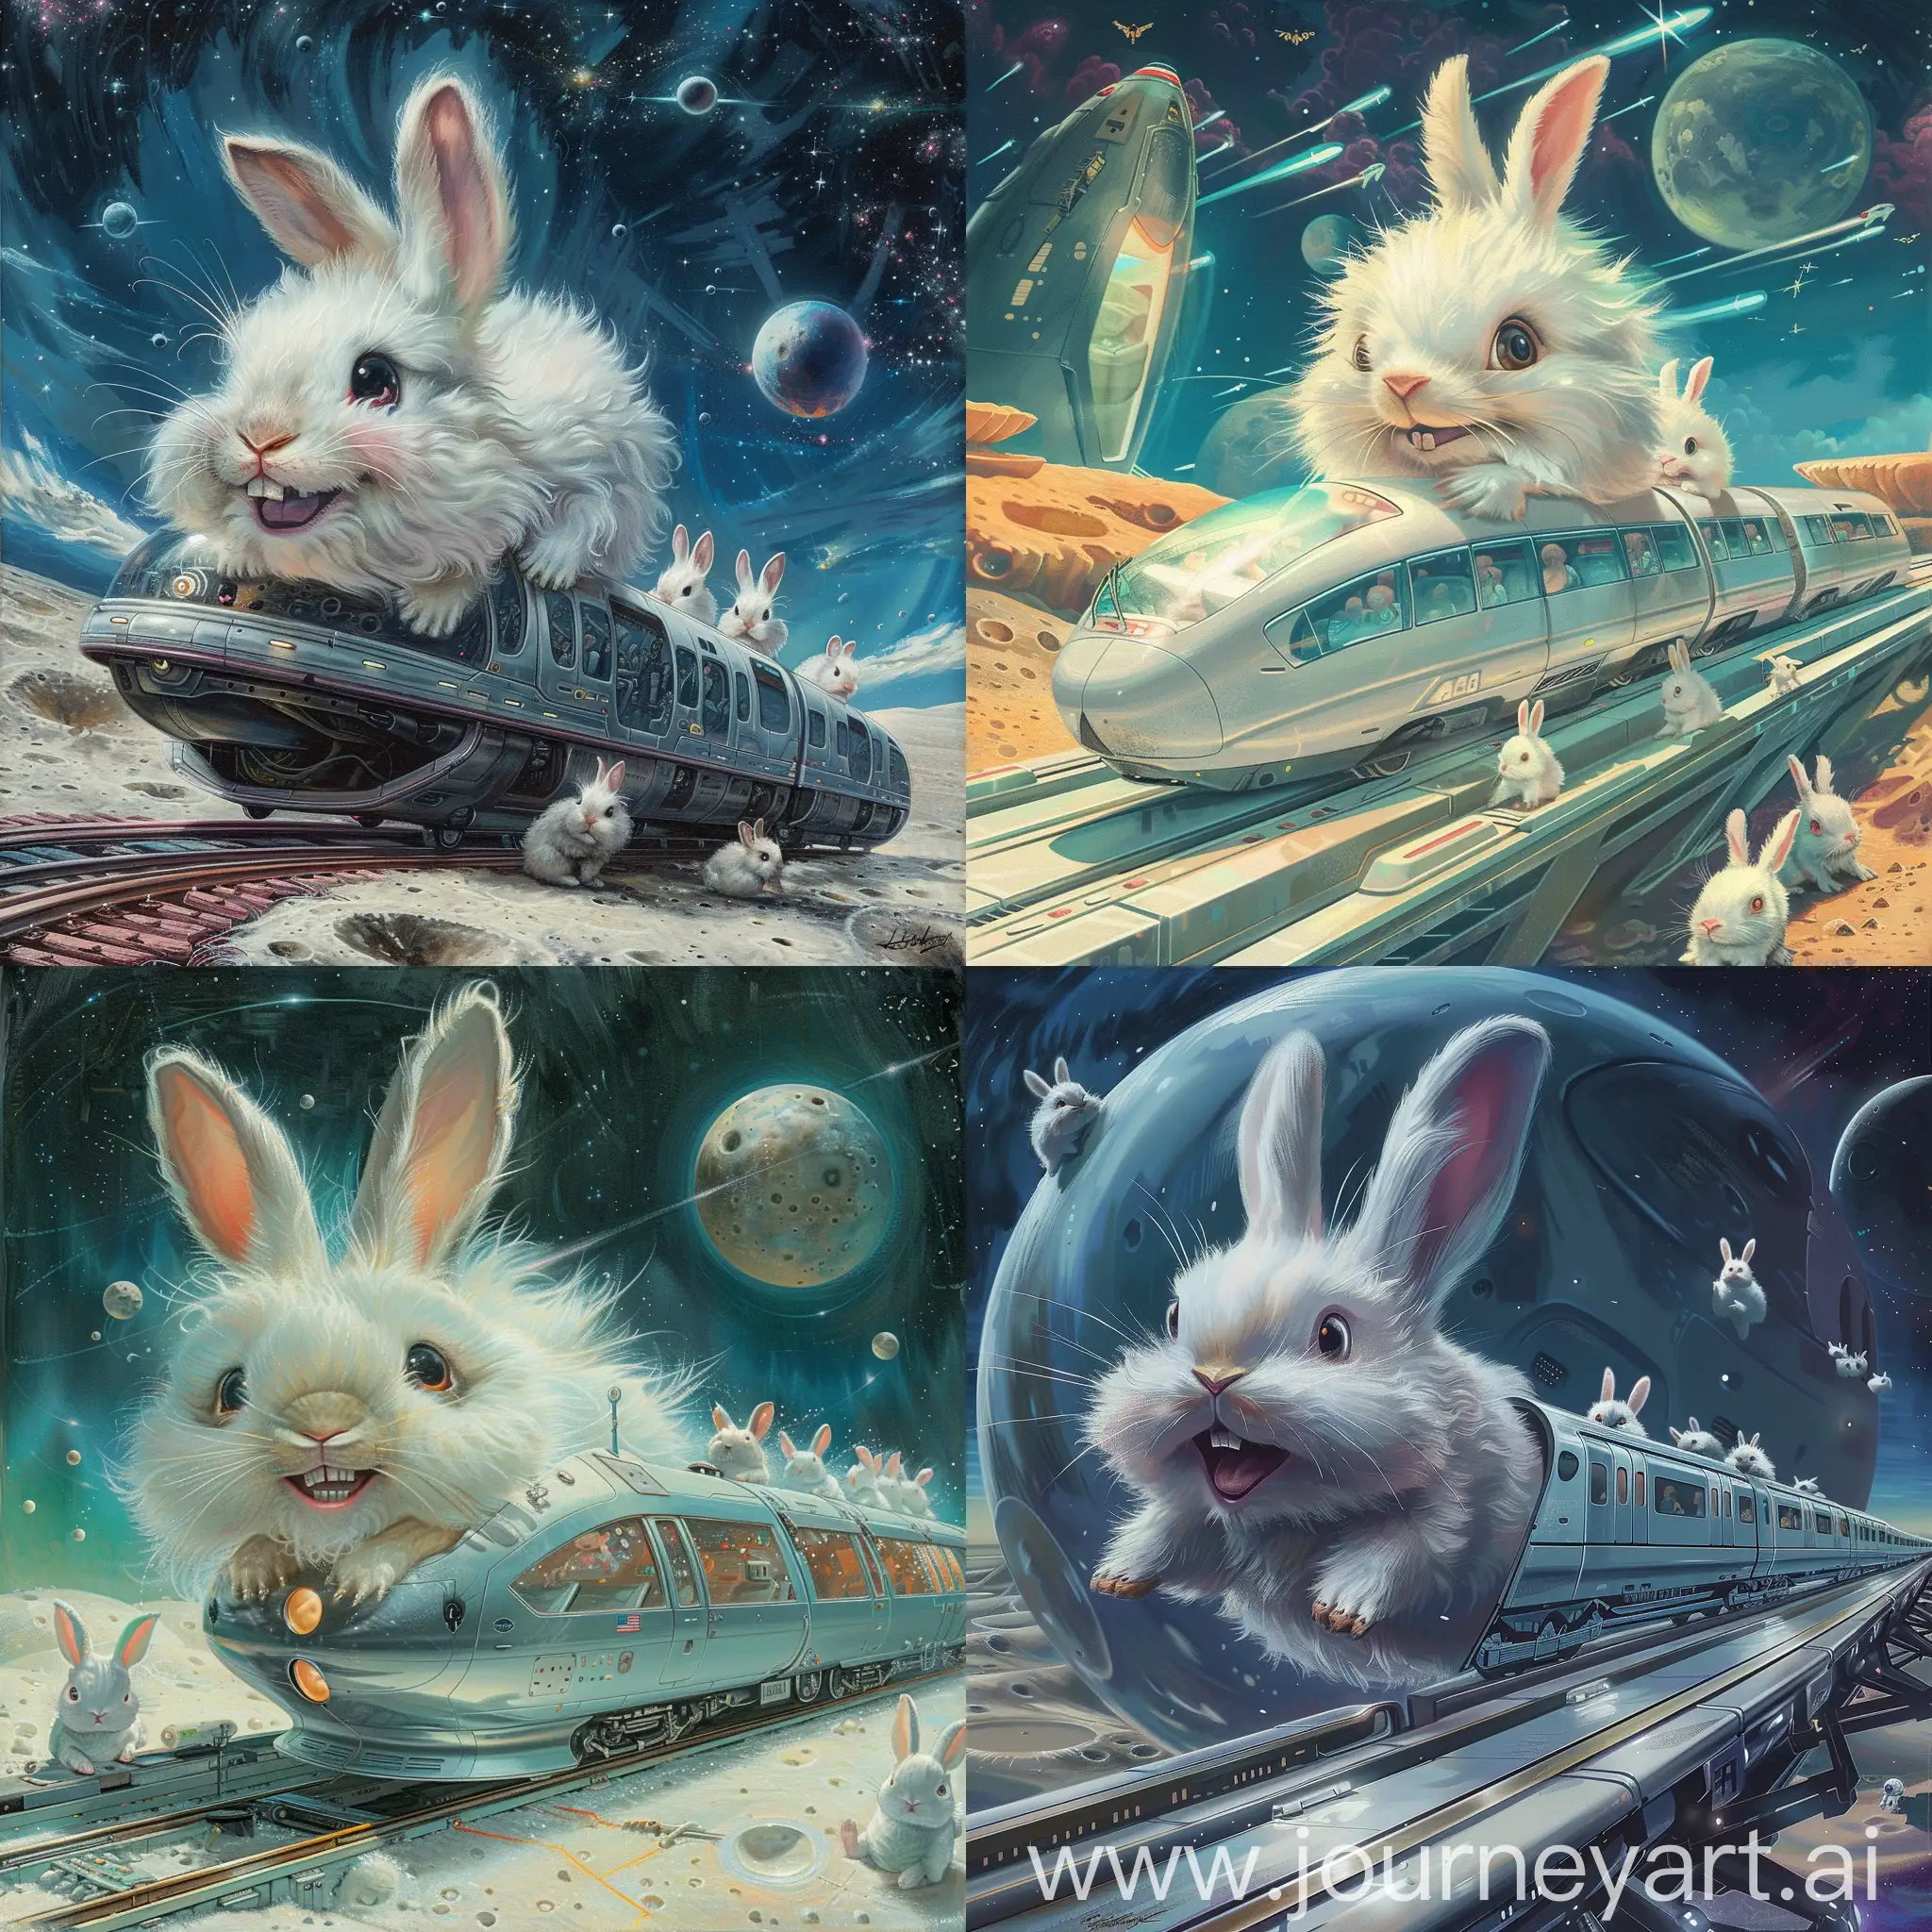 mucha painting mode:

a cute furry white rabbit becomes a high speed train, it is smiling and it stops in a futuristic lunar base train platform,  other little cutes rabbits as passengers